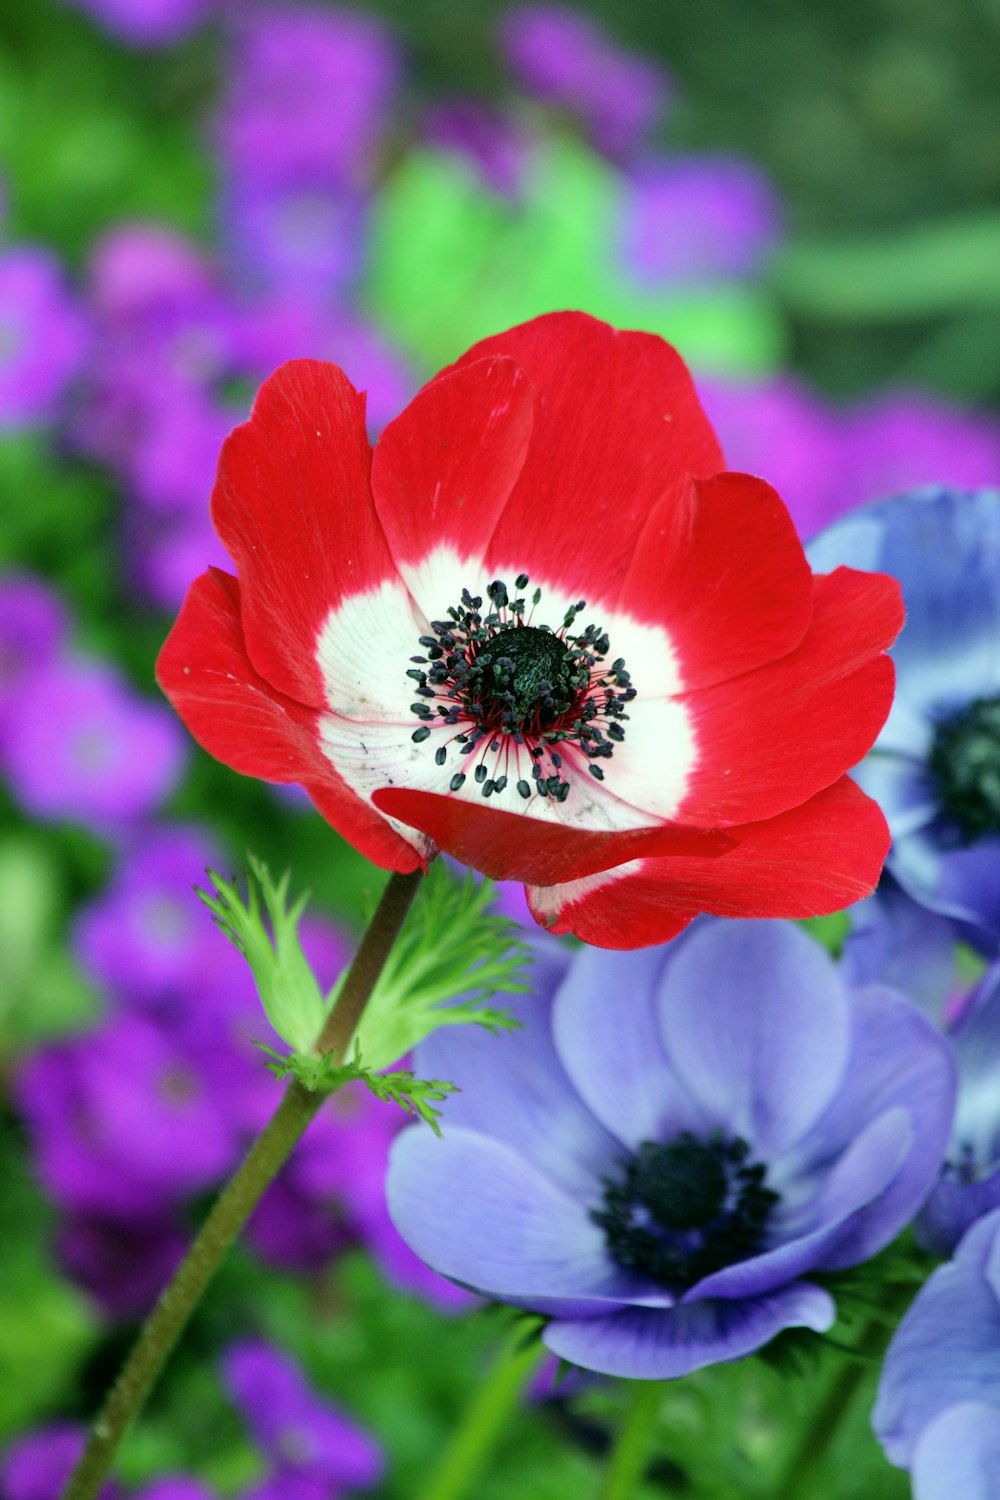 a red flower with a white center surrounded by purple and blue flowers